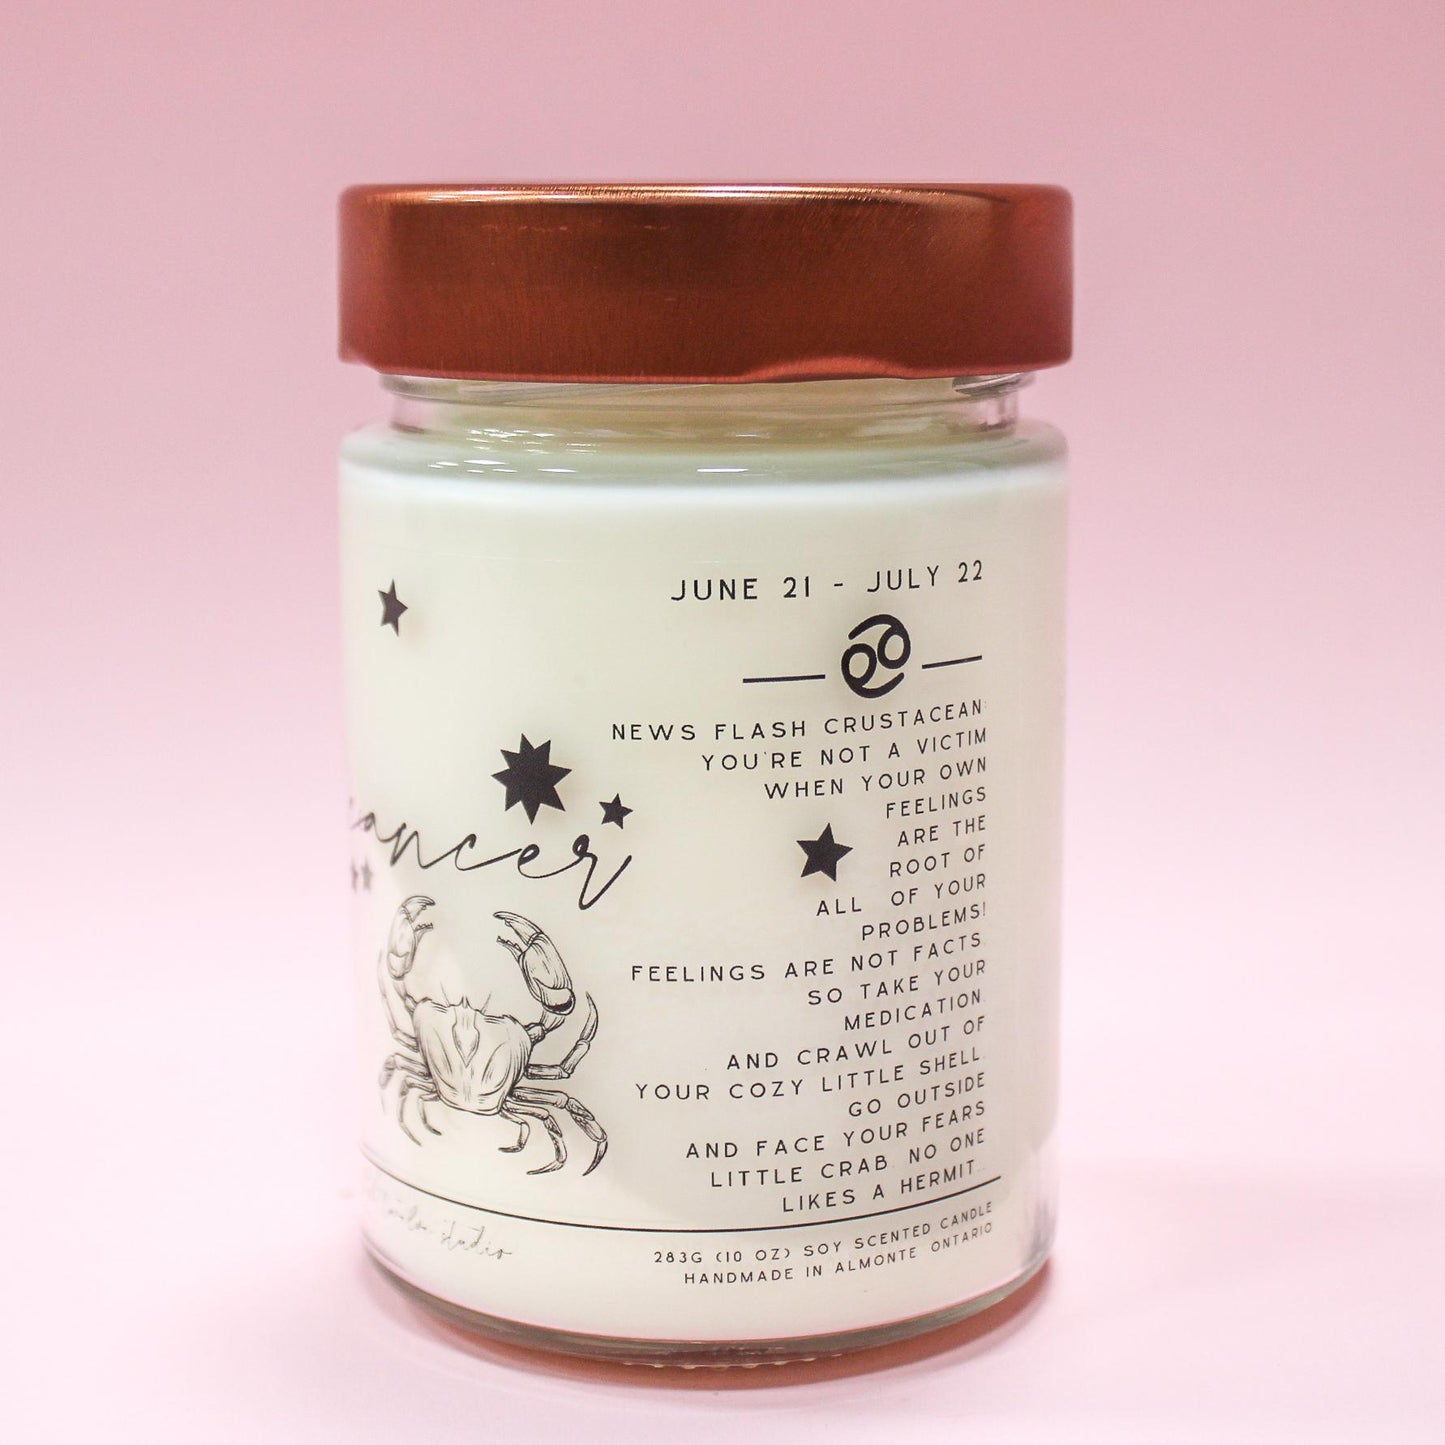 Zodiac Birthday Month Candle Collection w/Funny Horoscope